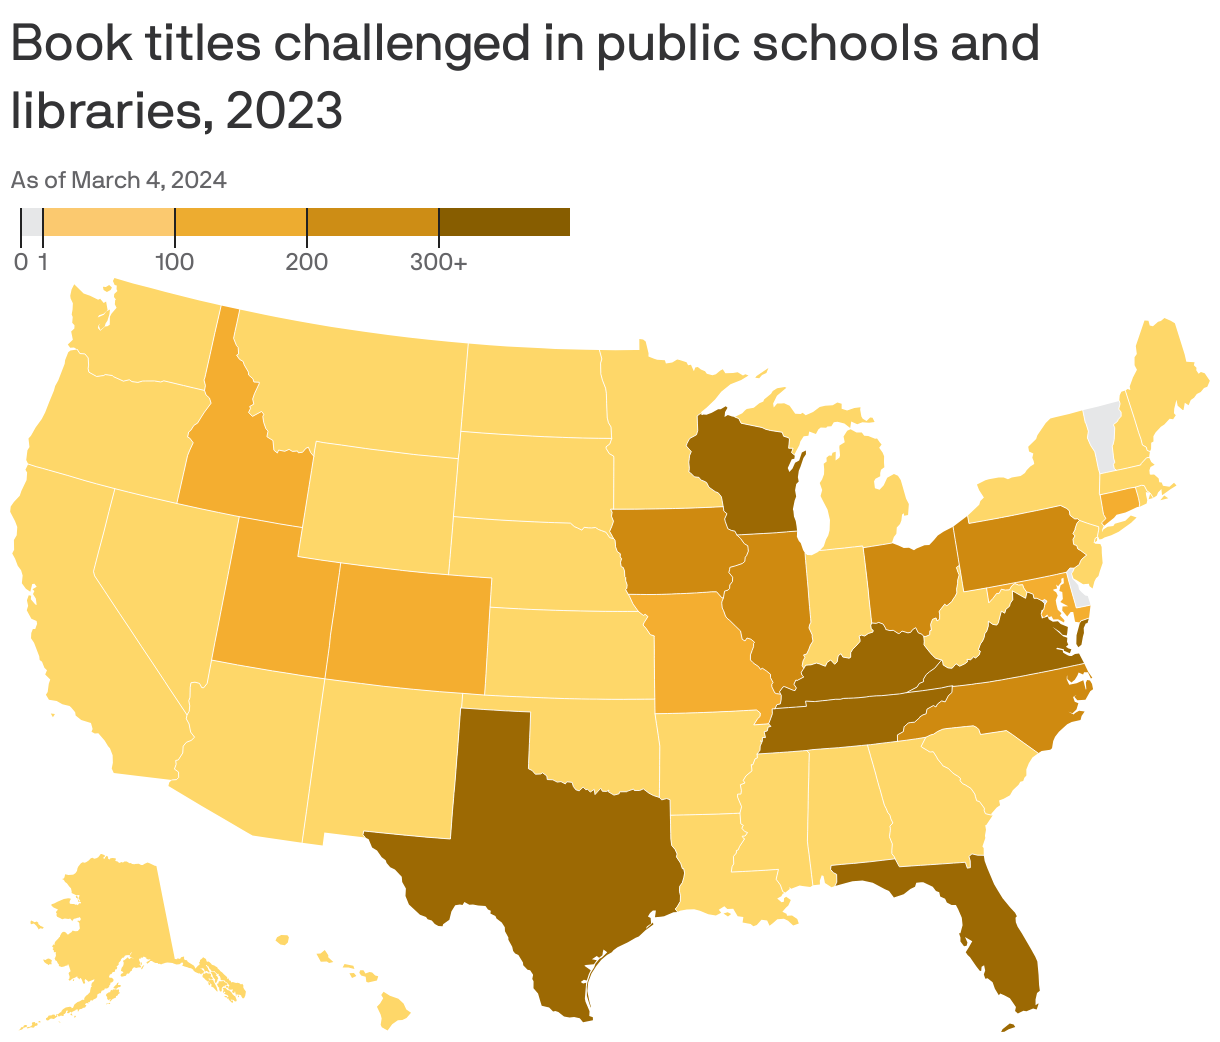 Book titles challenged in public schools and libraries, 2023